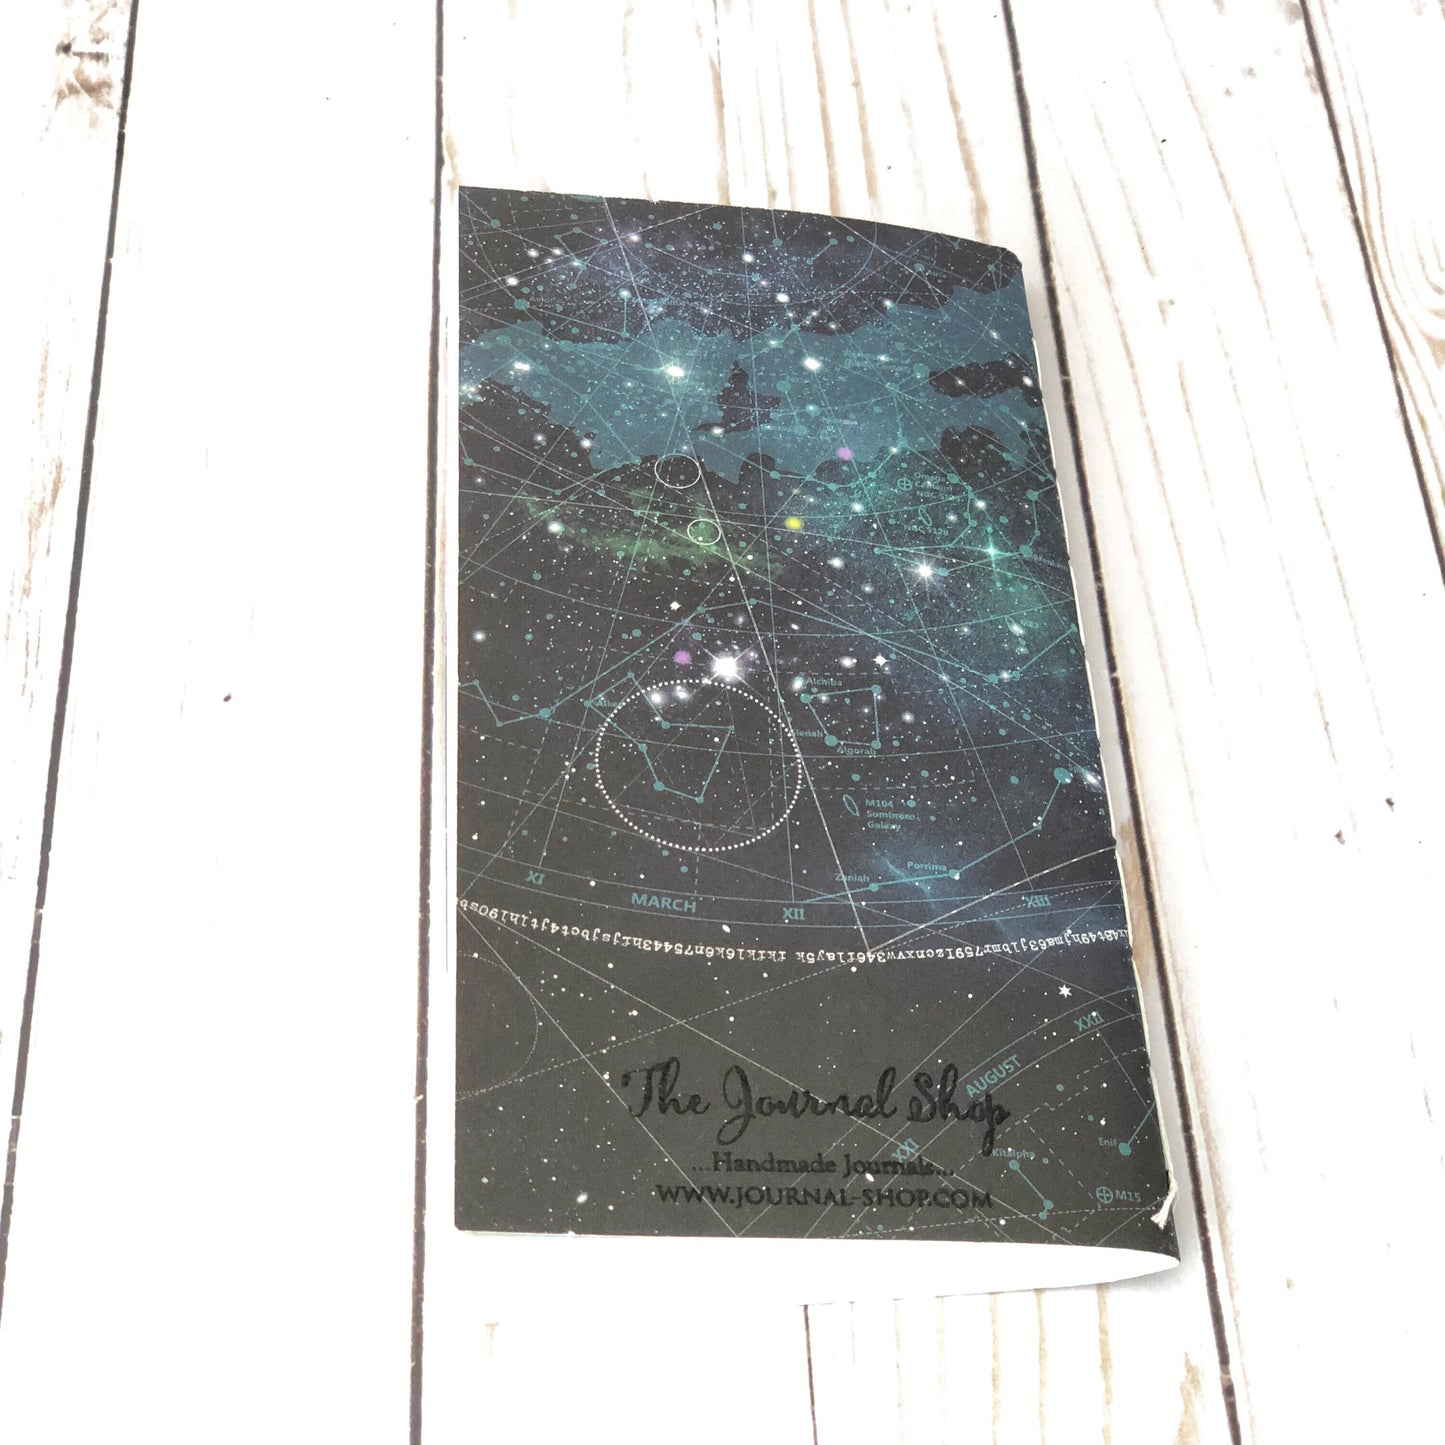 Set of 4 Watercolor Journals Sketchbooks with Astronomy Night Sky Theme,Travelers Notebook Refill Insert,Pocket Art Journal, Gift for Artist